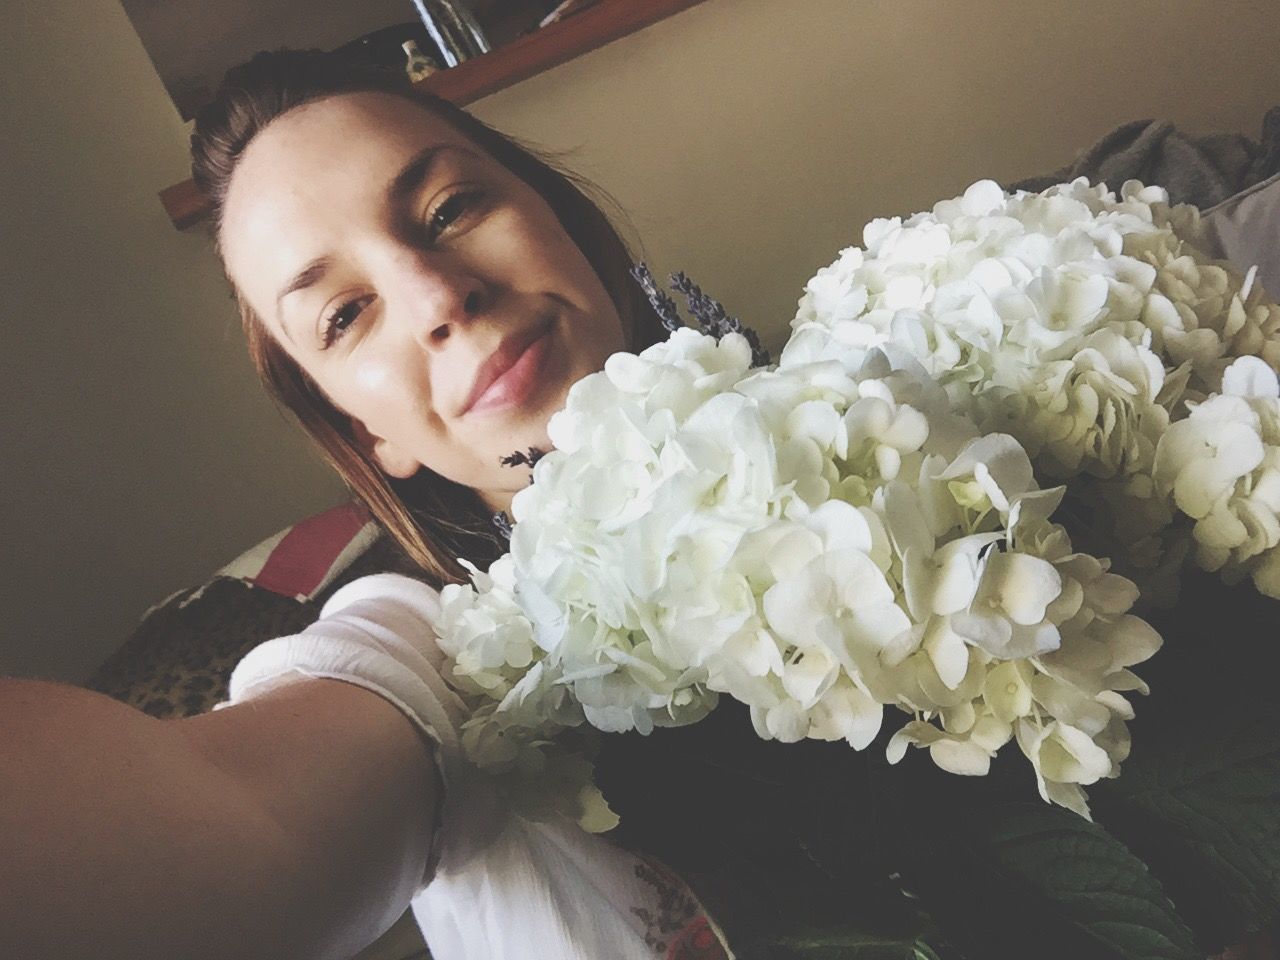 flower, freshness, fragility, indoors, portrait, looking at camera, holding, beauty in nature, bouquet, petal, flower head, bunch of flowers, softness, springtime, nature, botany, focus on foreground, young adult